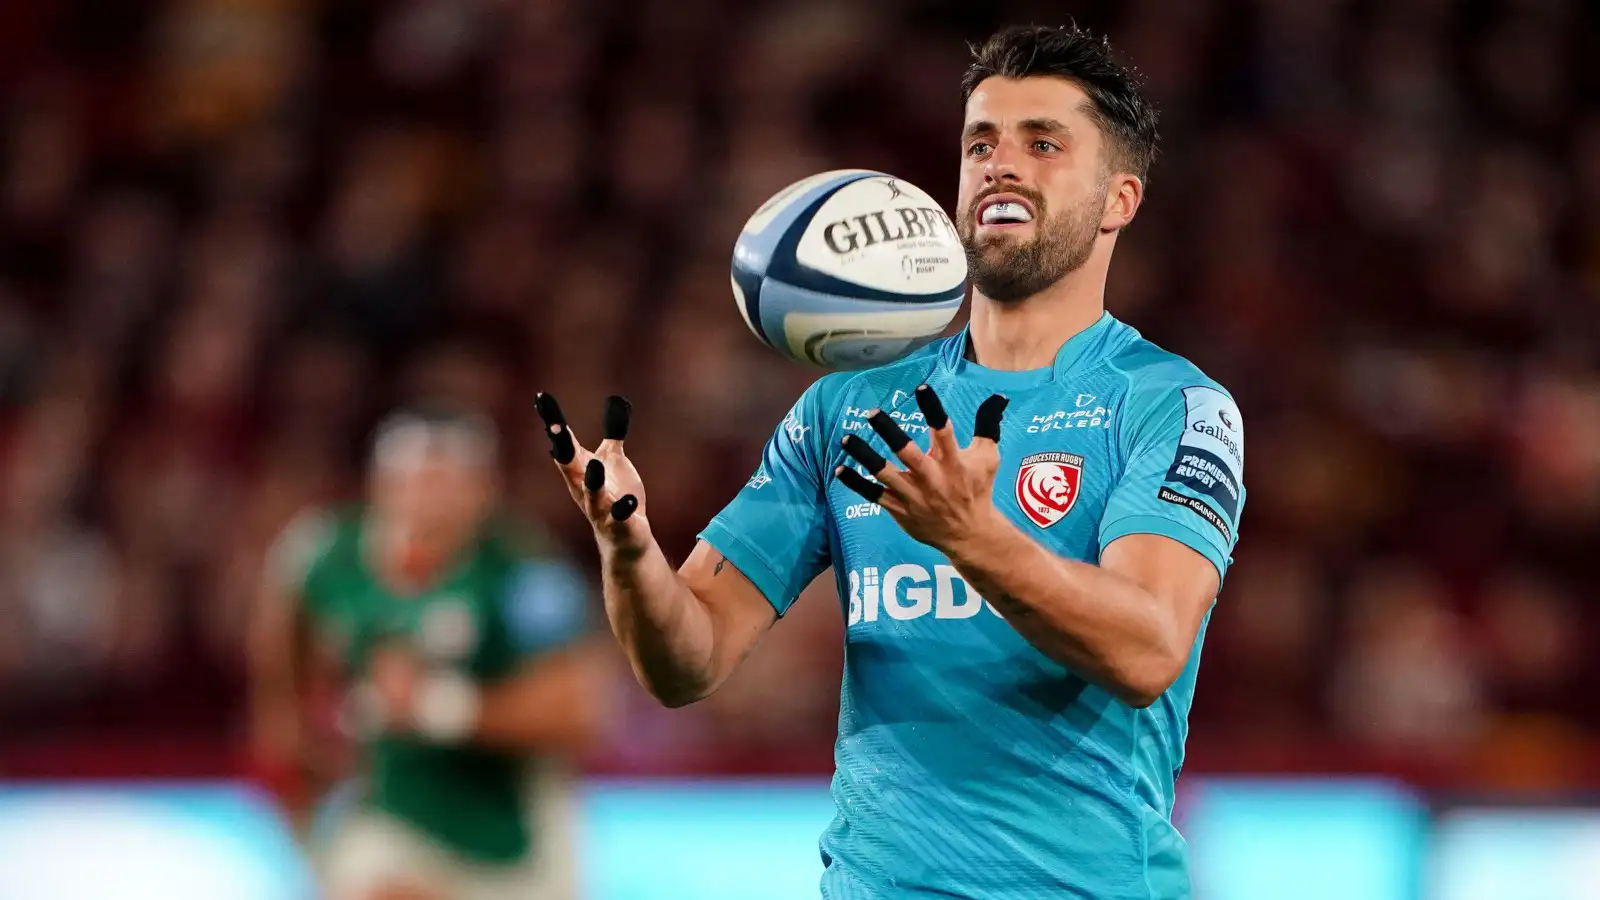 Gloucester's Adam Hastings catached the ball against London Irish.